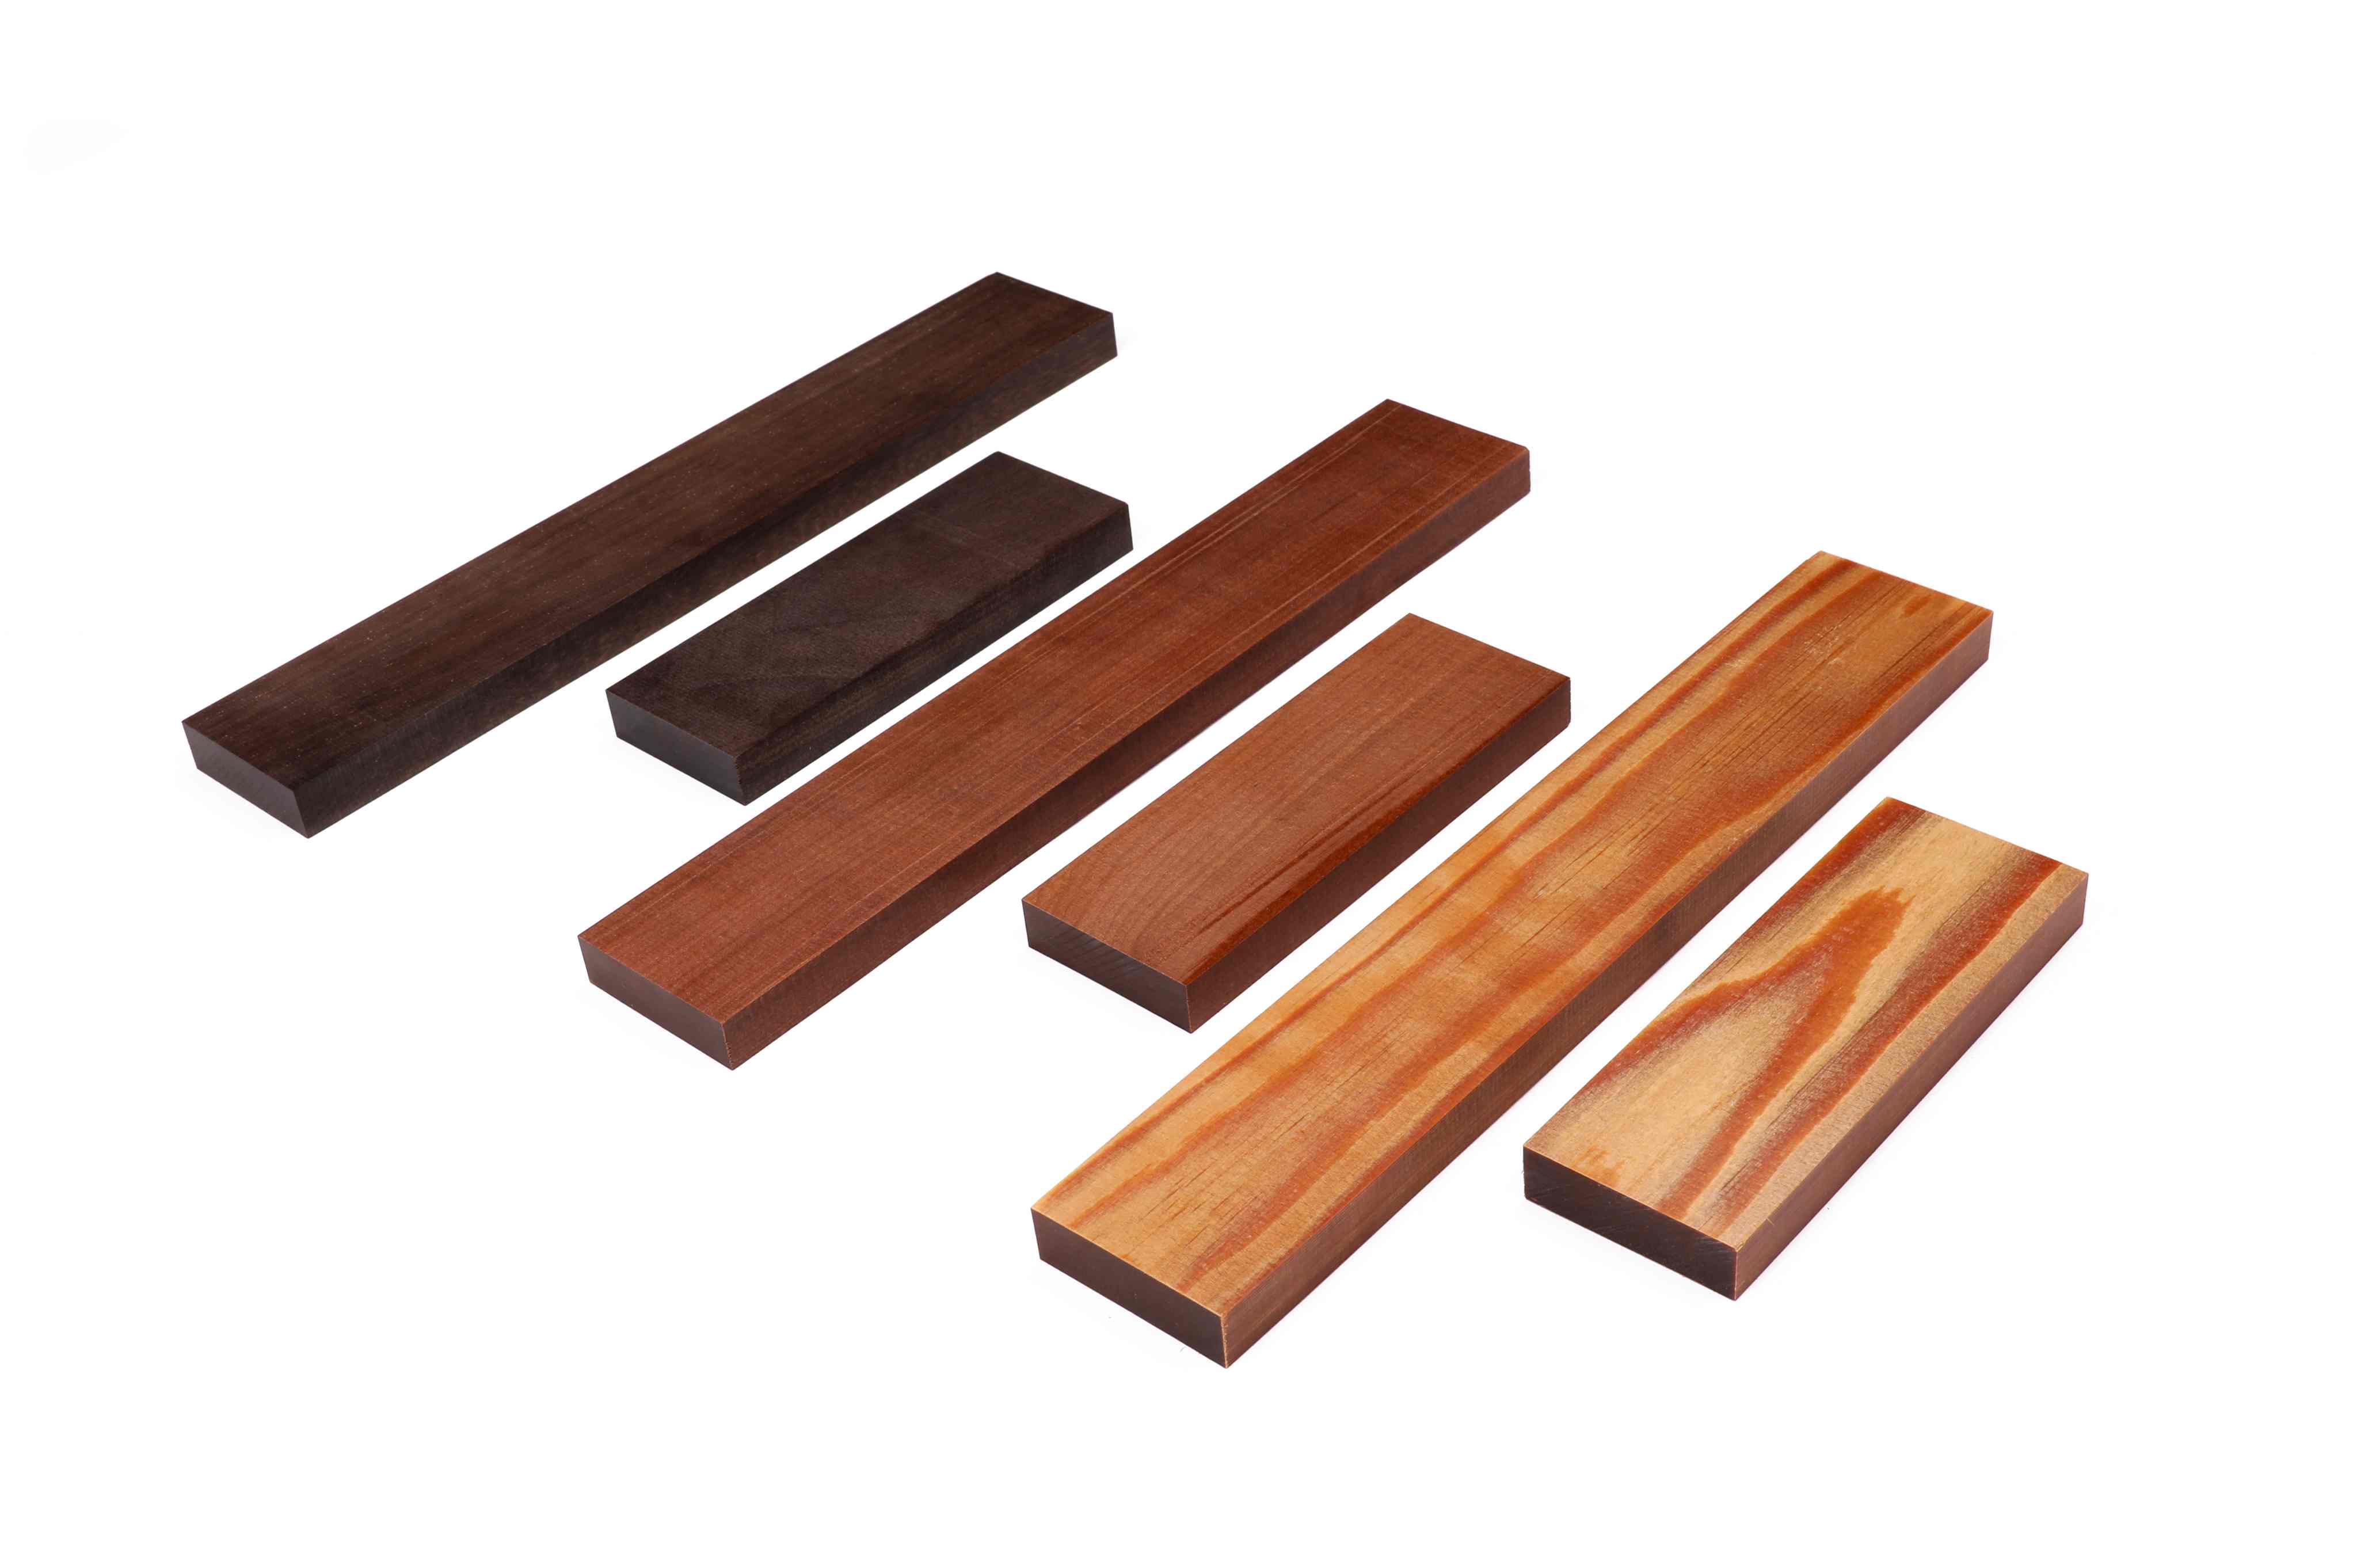 Sonowood square timbers for fingerboard and tailpiece. Left: walnut, center: maple, right: spruce